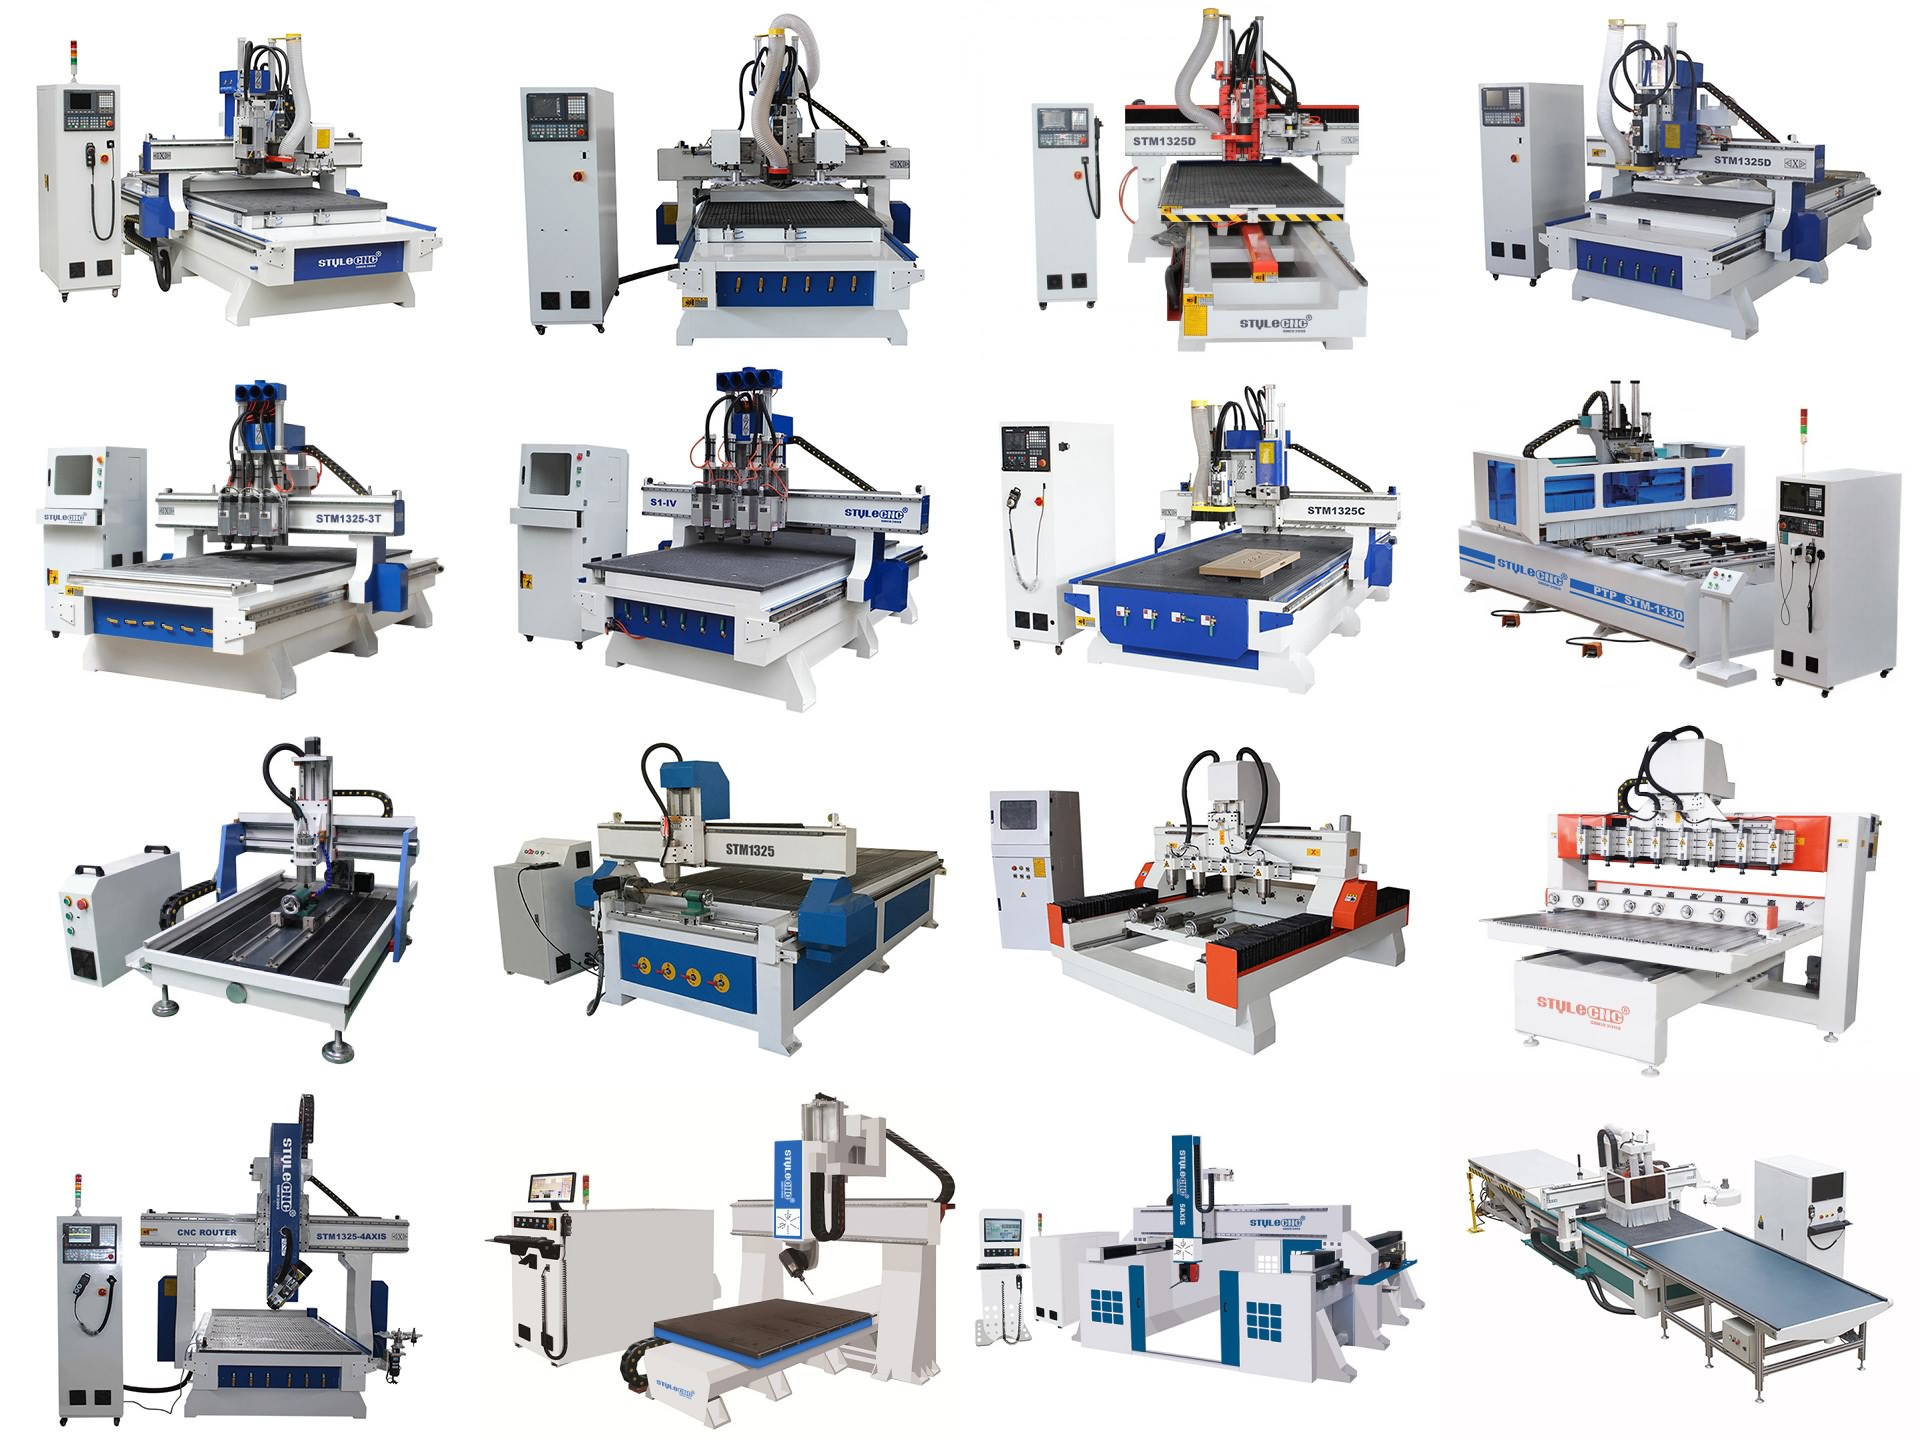 2022 Best CNC Machines for Woodworking